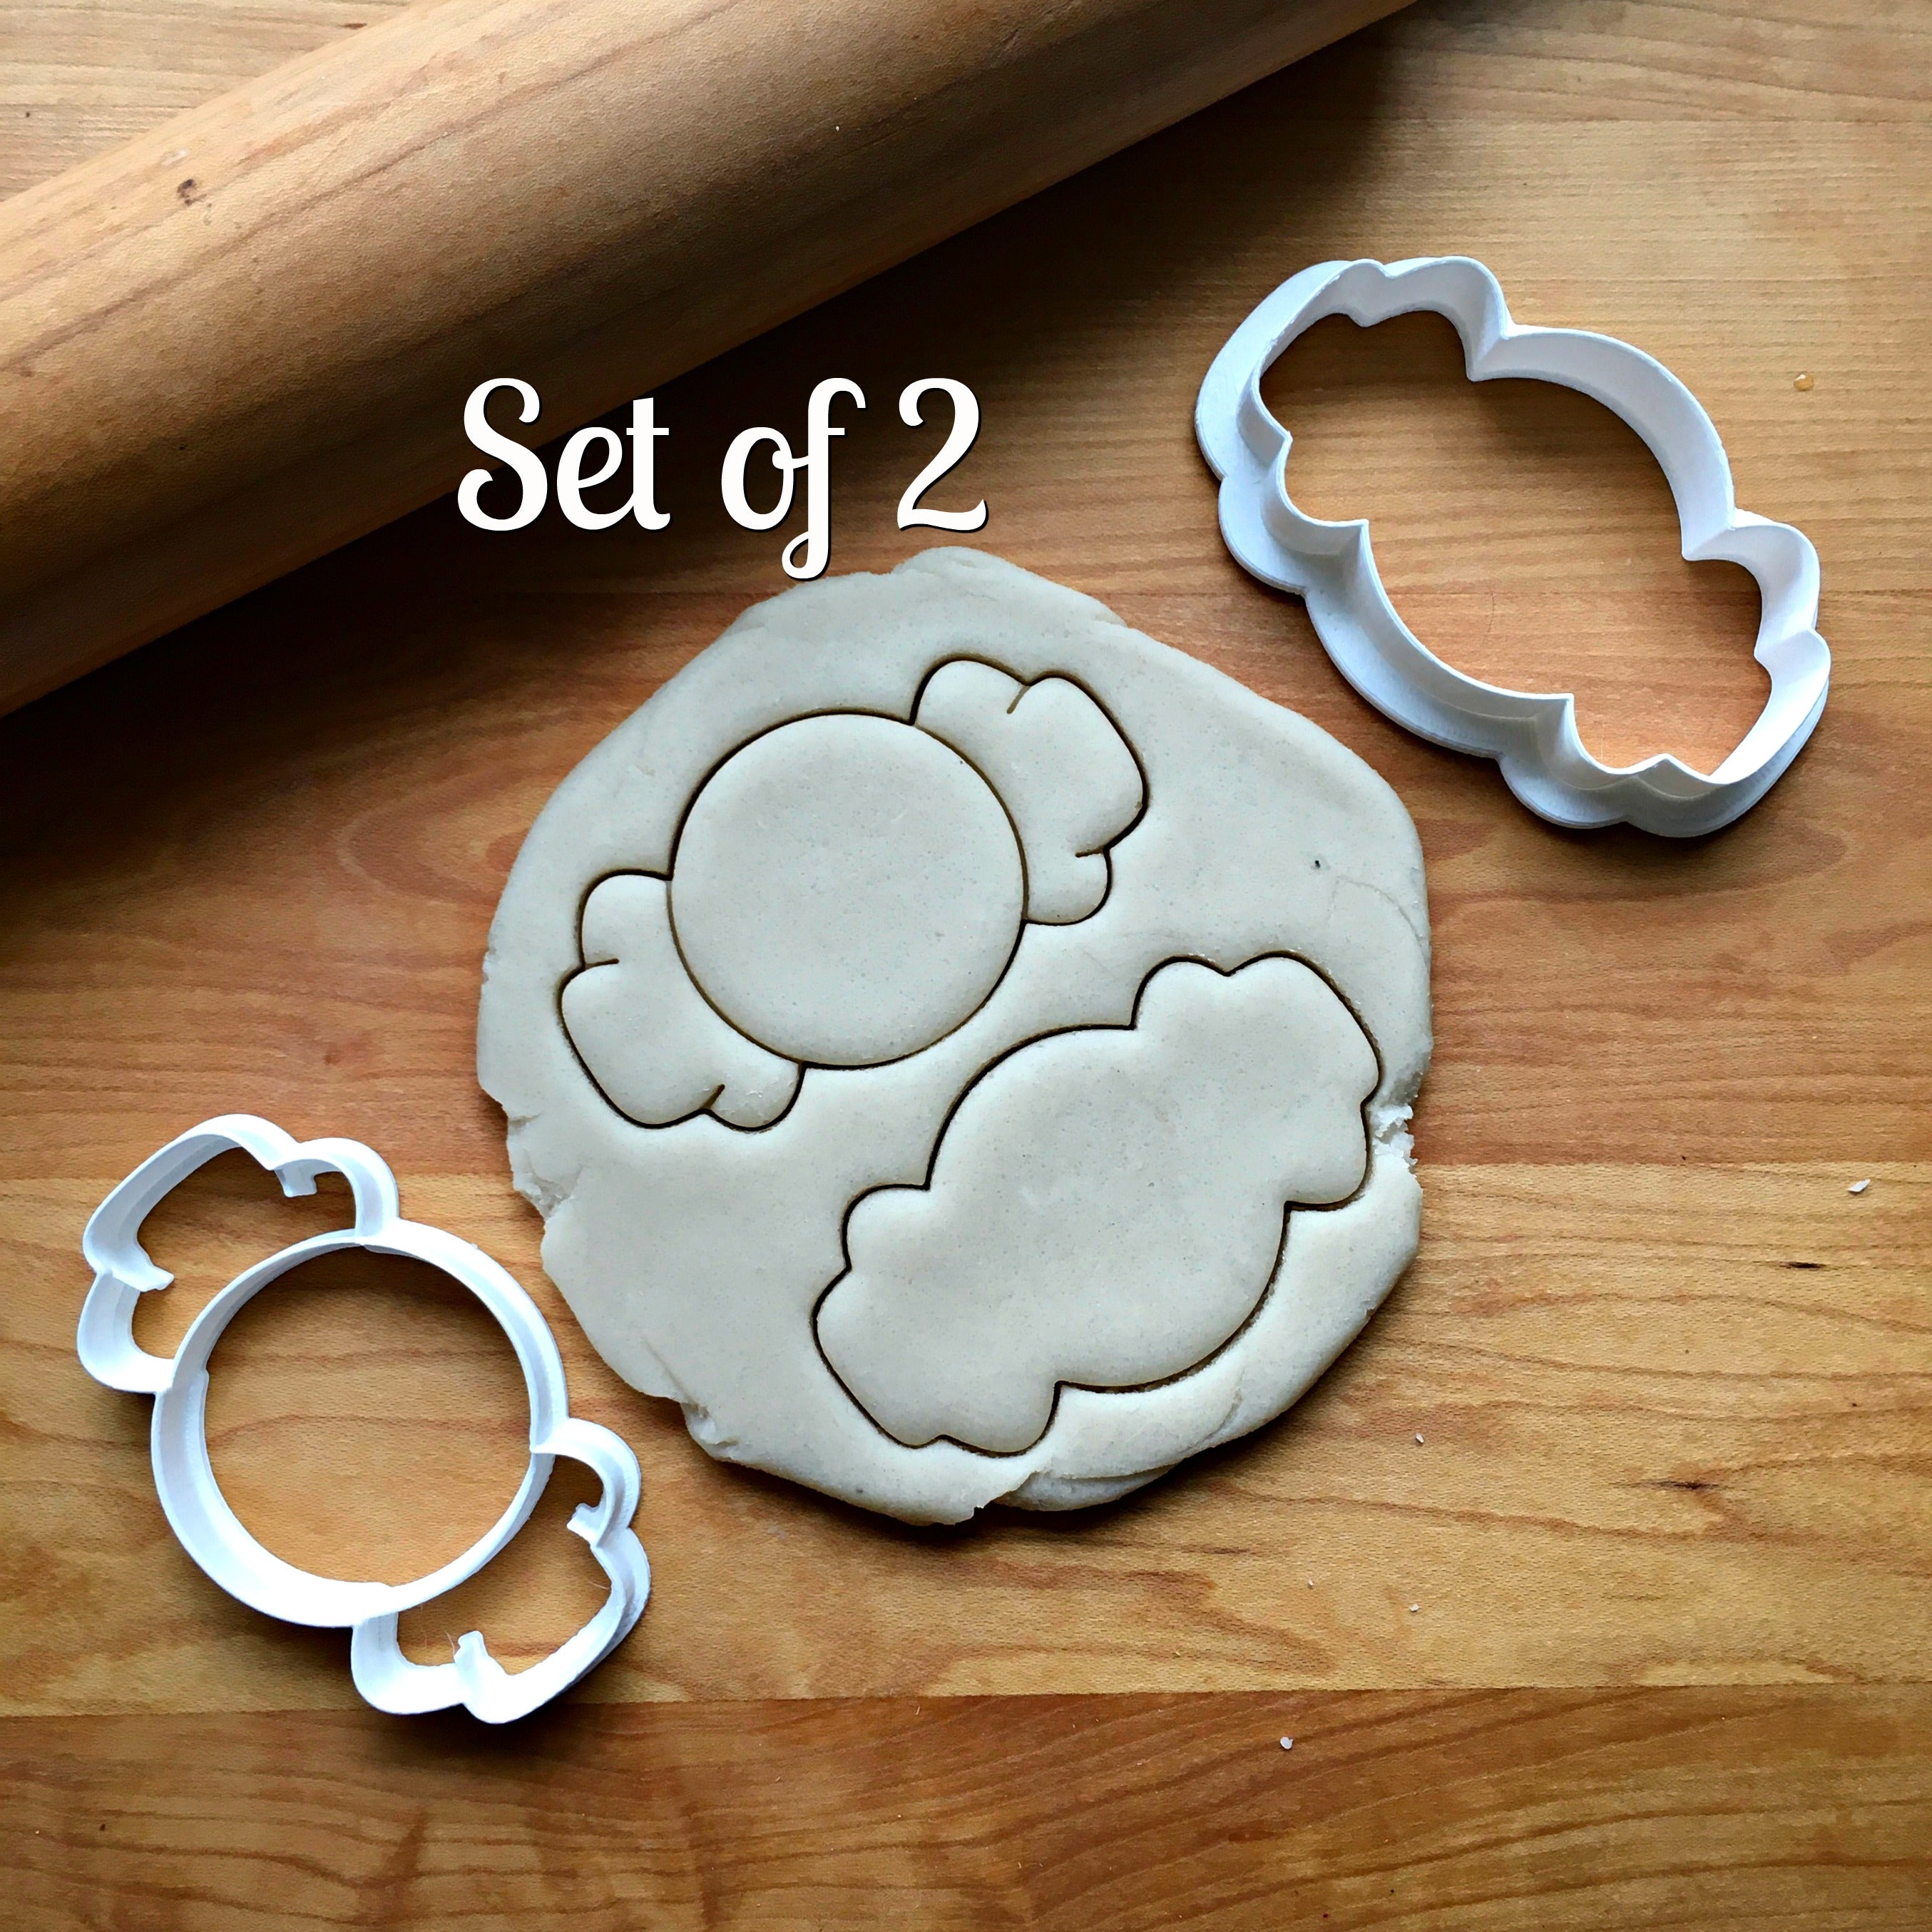 Set of 2 Hard Candy Cookie Cutters/Dishwasher Safe